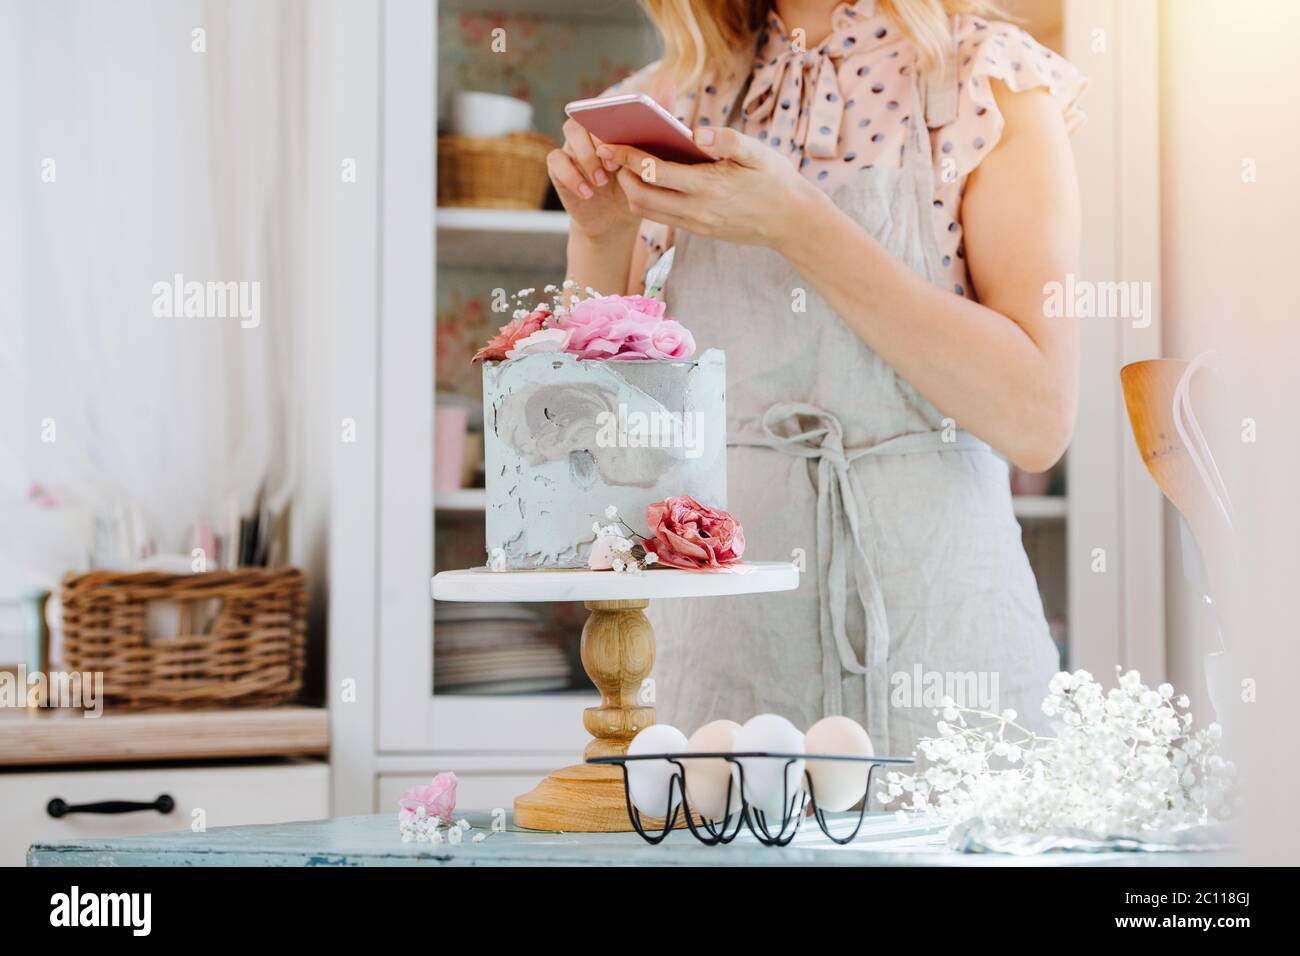 Young housewife texing, taking short break from baking sweet cake. Stock Photo